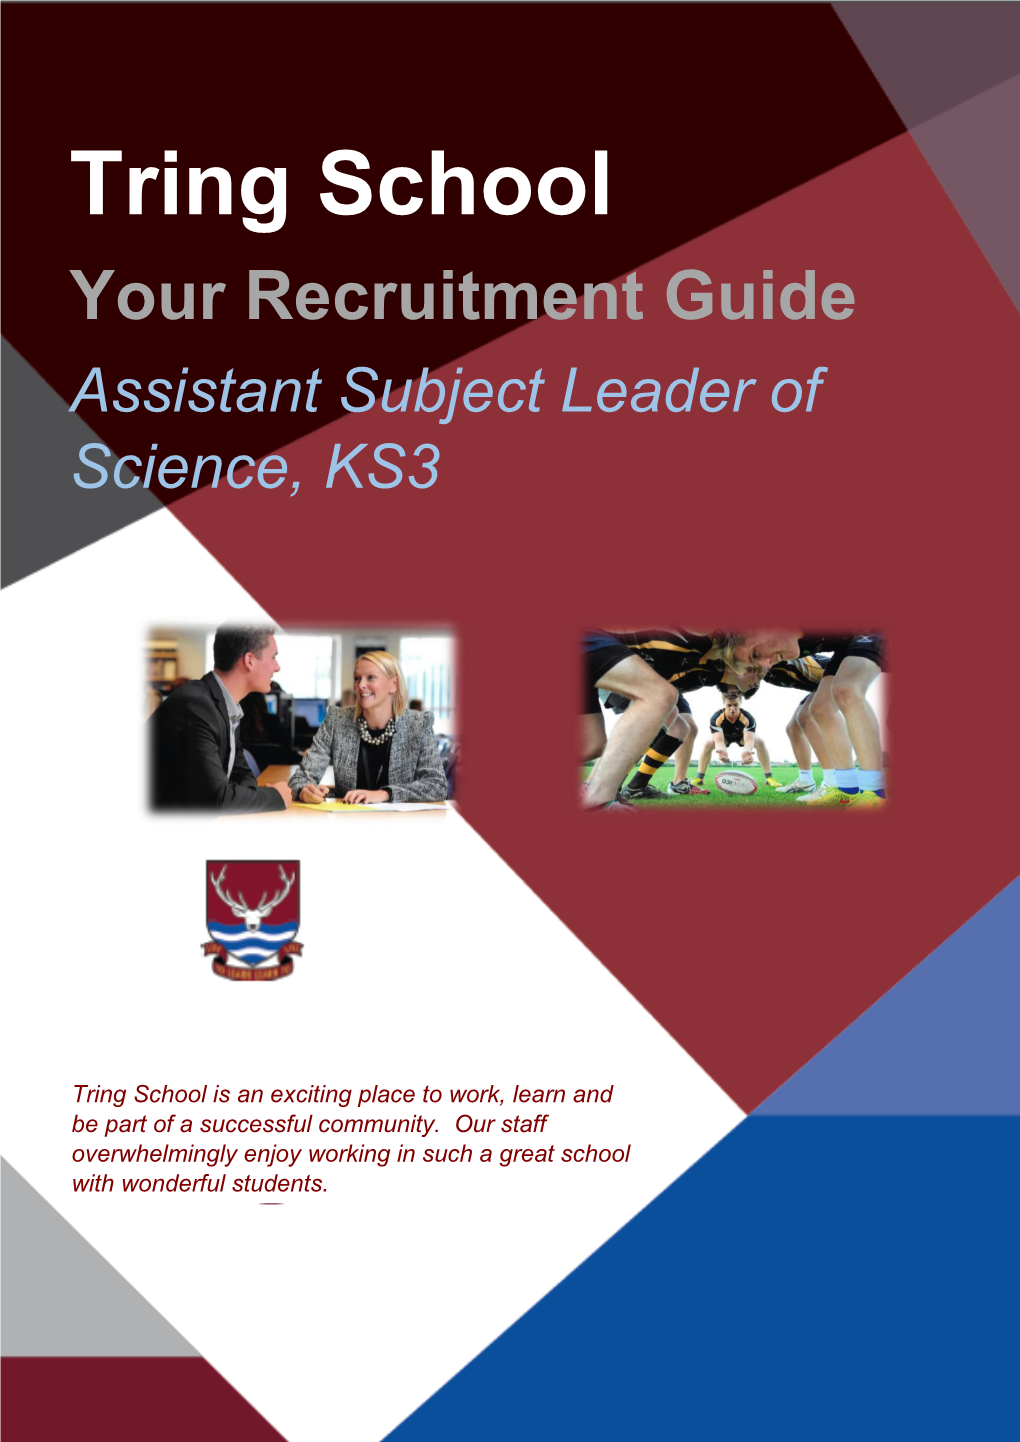 Tring School Your Recruitment Guide Assistant Subject Leader of Science, KS3